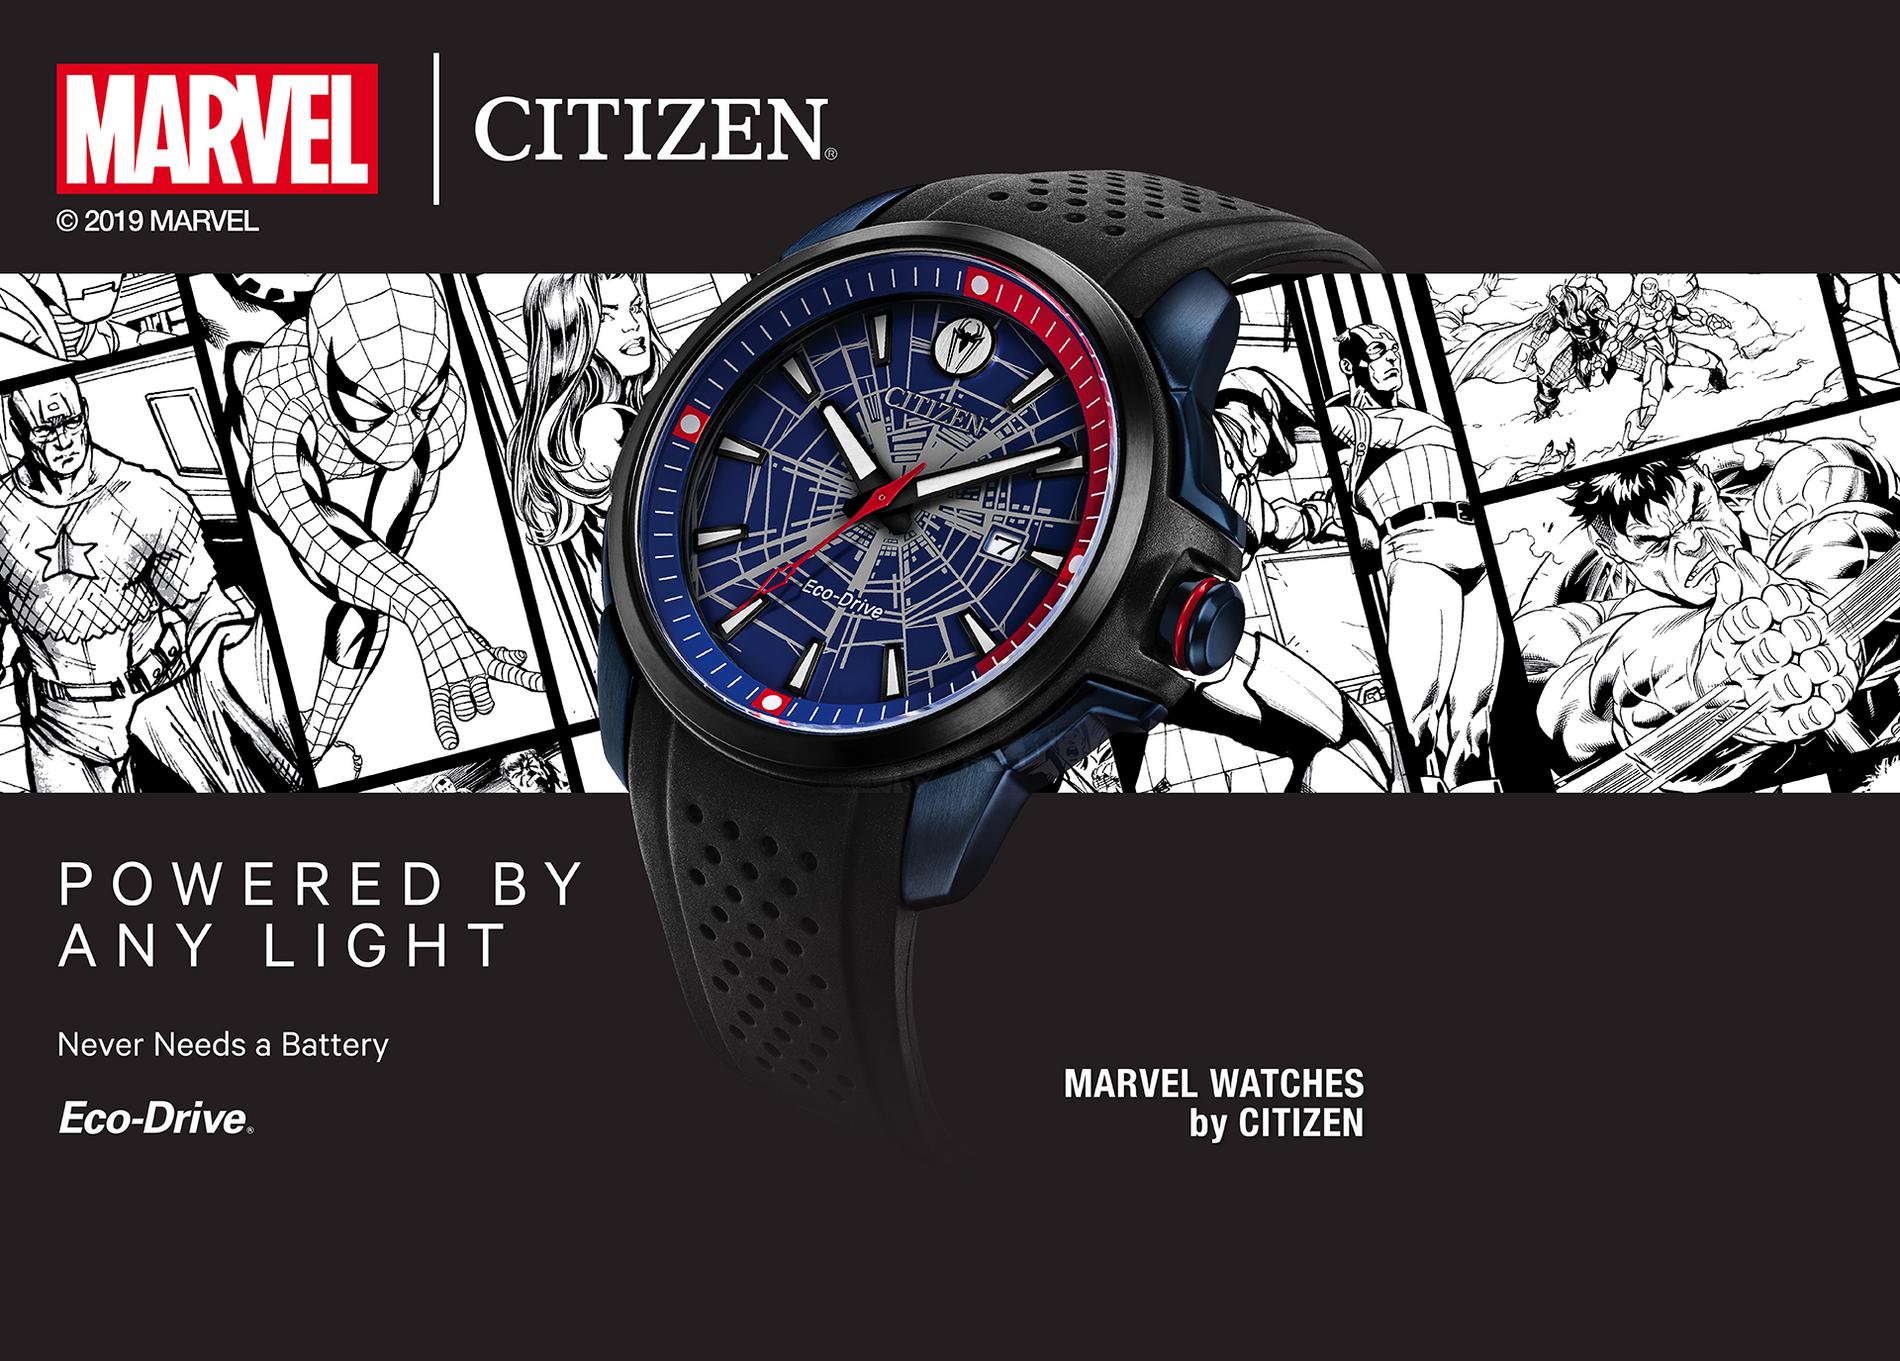 Marvel Watches by Citizen